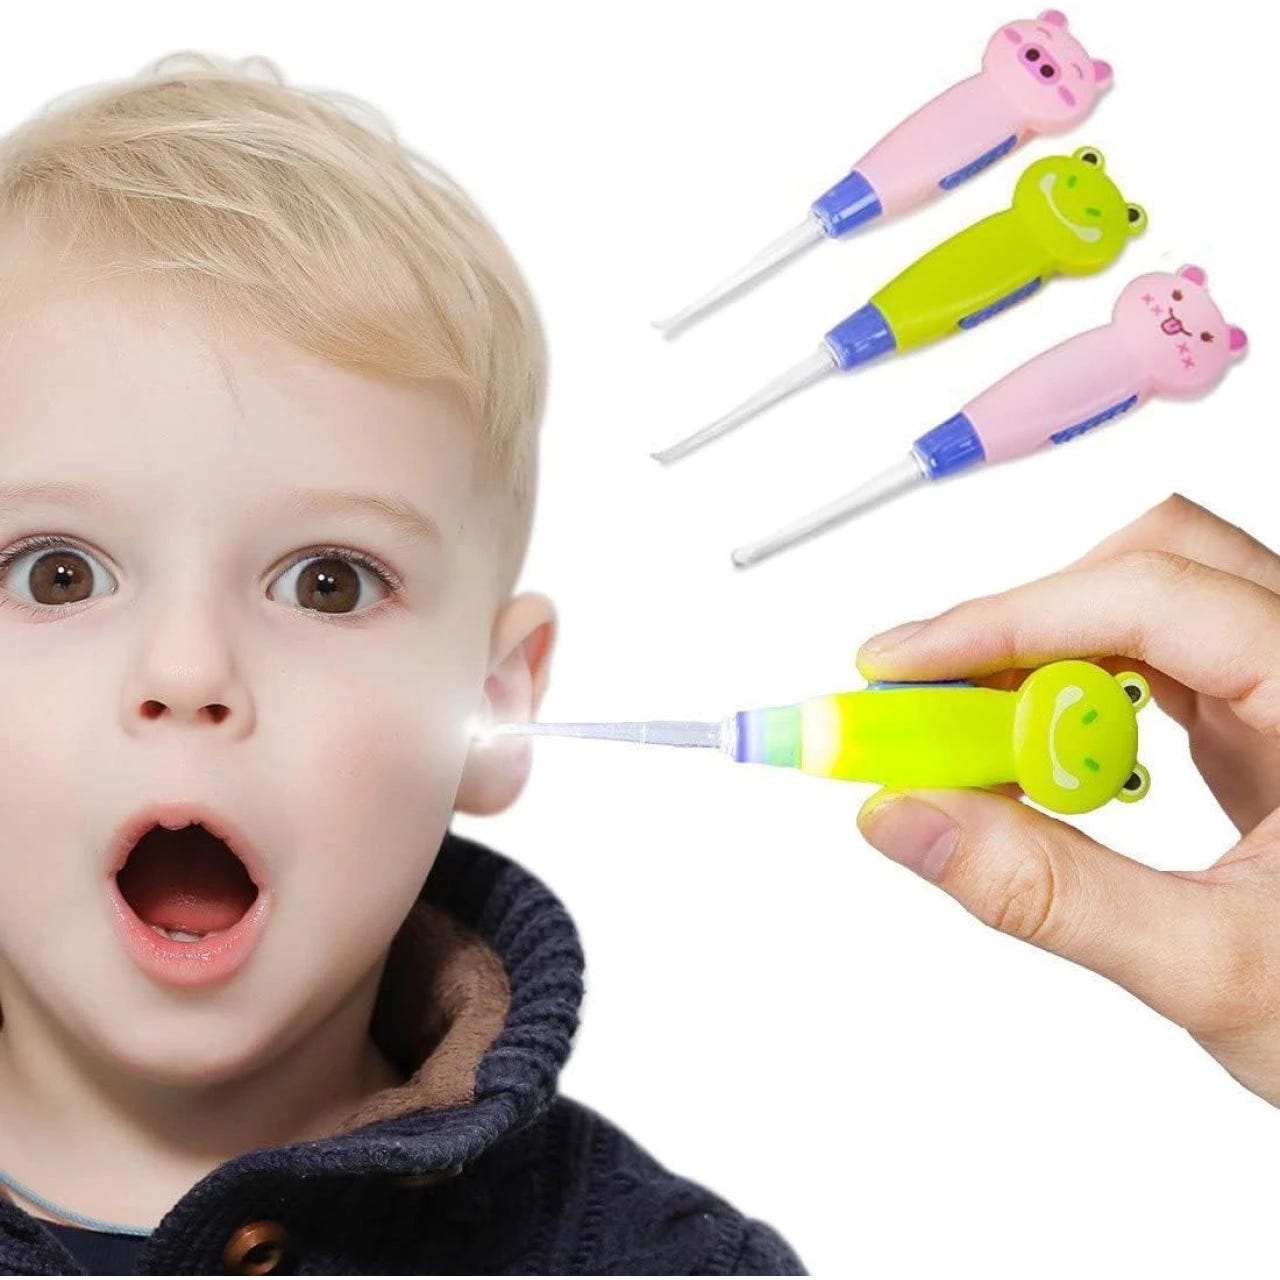 Oogiebear Baby Nose Cleaner and Ear Wax Removal Tool with LED Light for Newborns